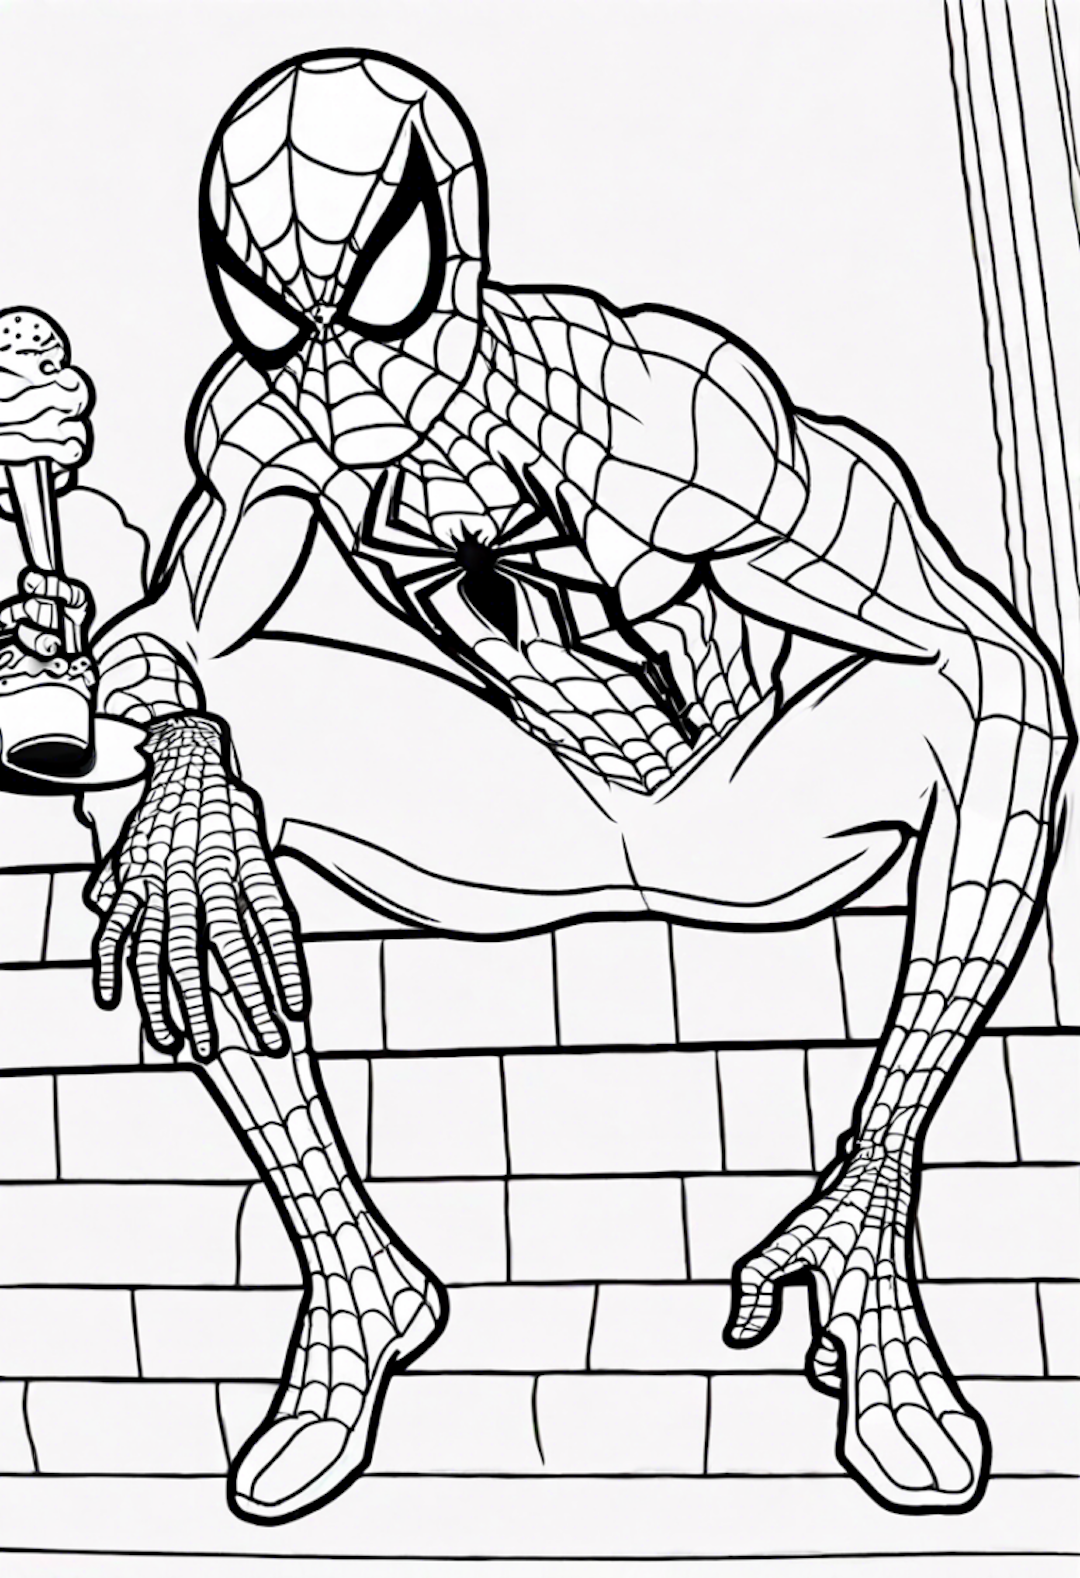 Spider-Man Enjoying Ice Cream on the Rooftop coloring pages